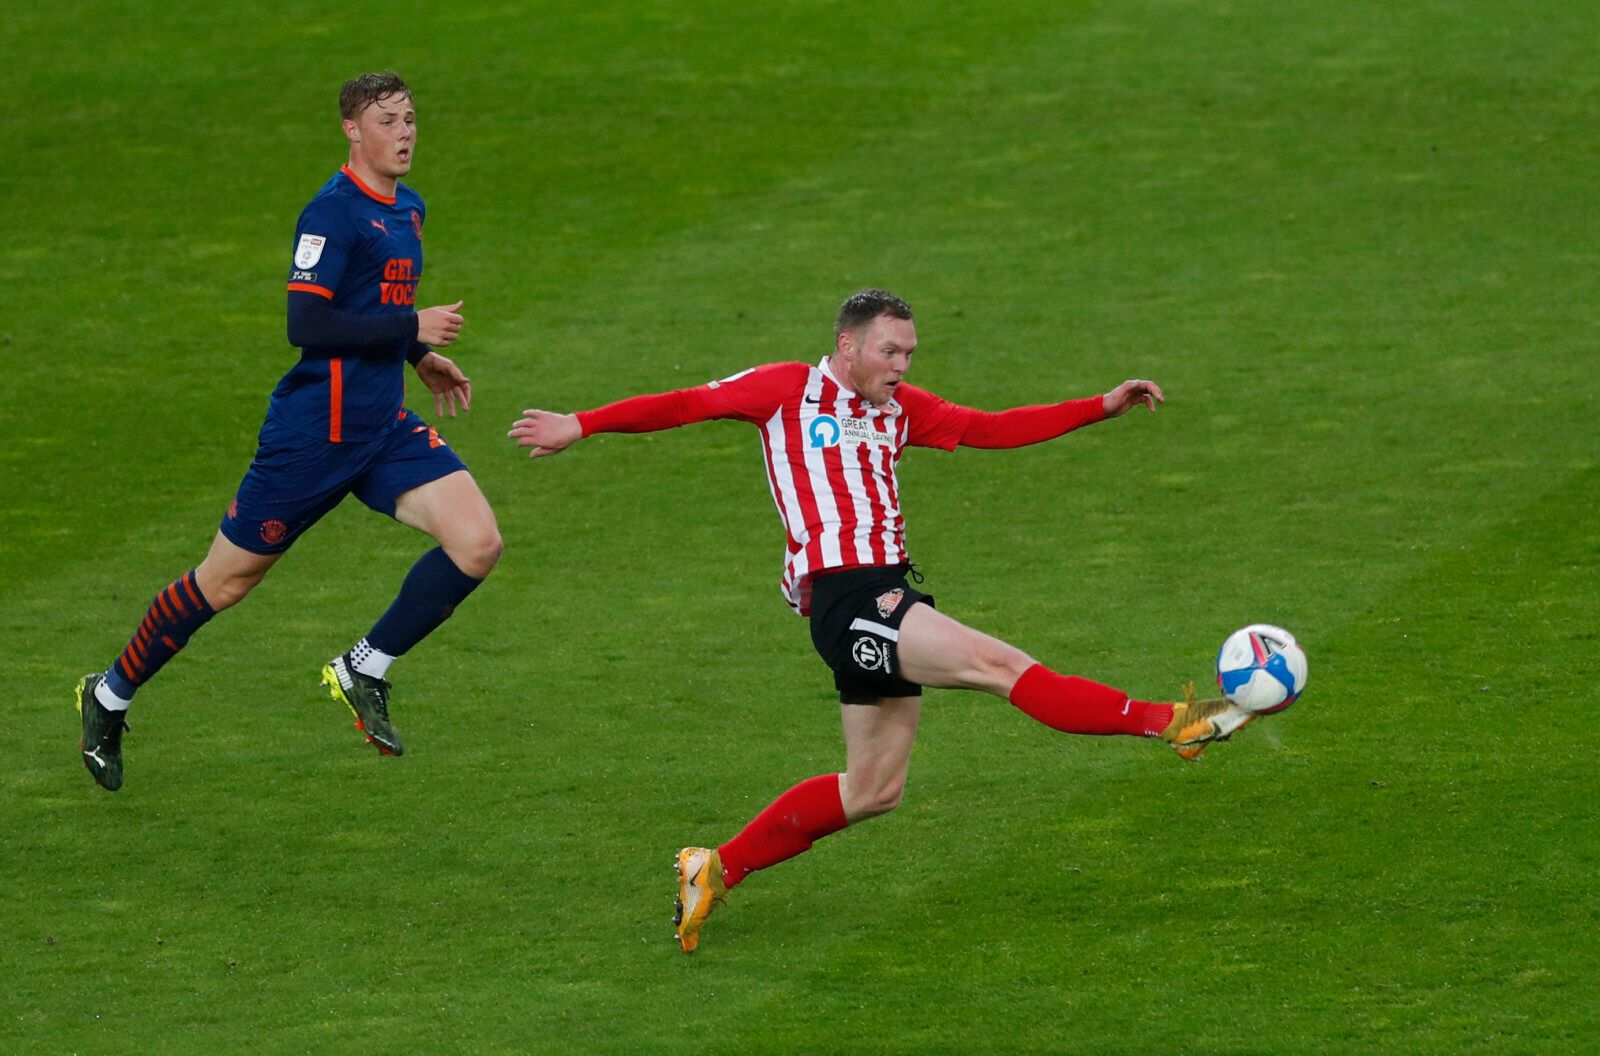 Soccer Football - League One - Sunderland v Blackpool - Stadium of Light, Sunderland, Britain - April 27, 2021 Sunderland's Aiden O'Brien in action Action Images/Lee Smith EDITORIAL USE ONLY. No use with unauthorized audio, video, data, fixture lists, club/league logos or 'live' services. Online in-match use limited to 75 images, no video emulation. No use in betting, games or single club /league/player publications.  Please contact your account representative for further details.